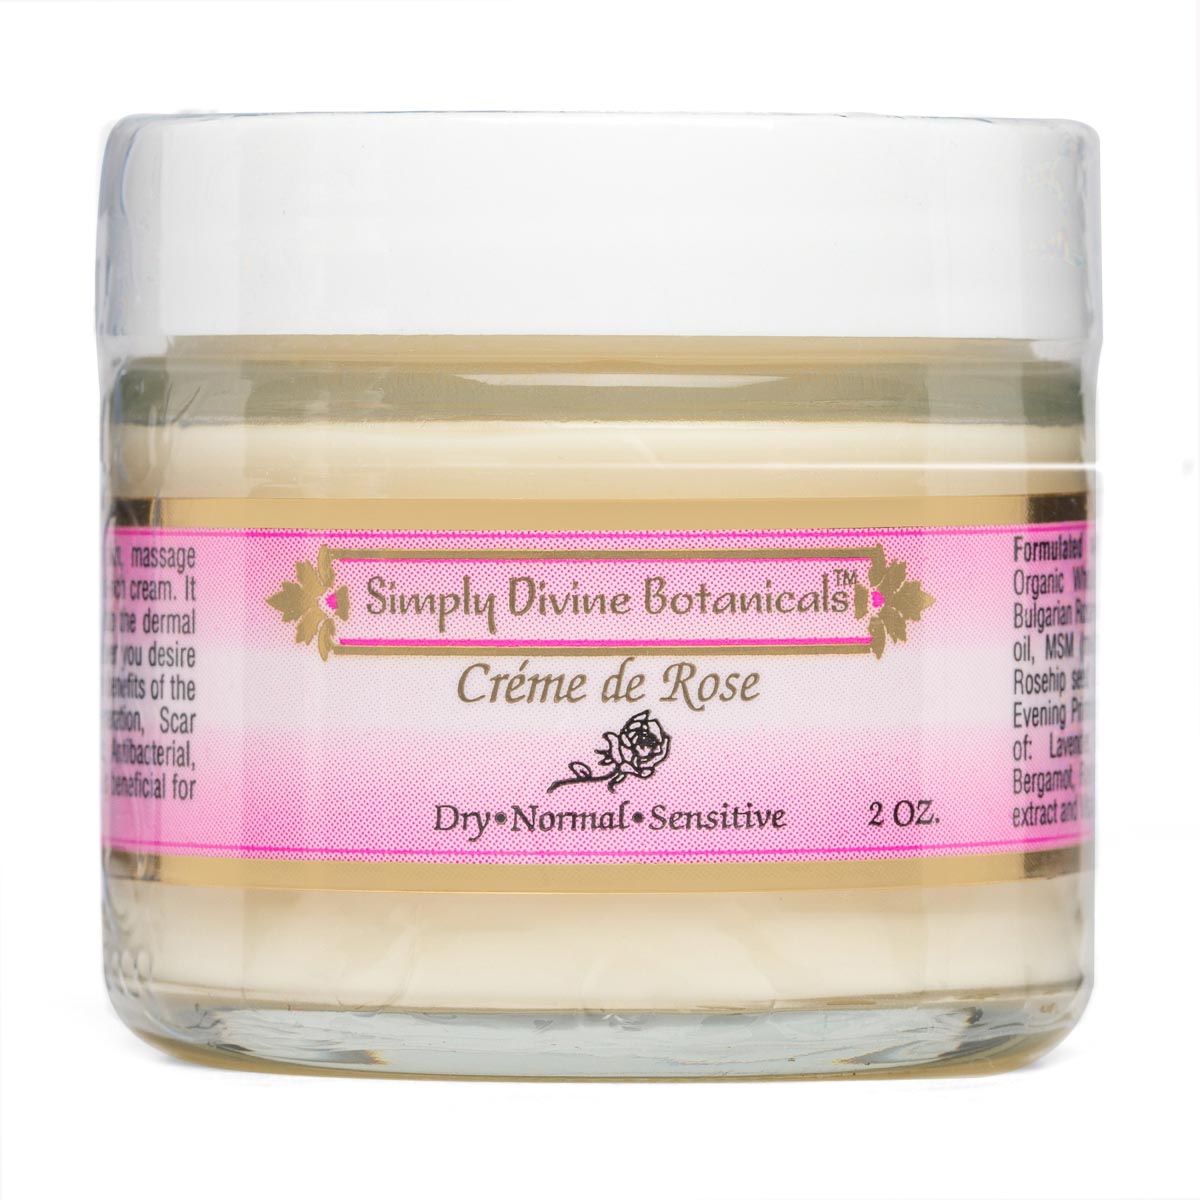 Creme de Rose Moisturizer | Simply Divine Botanicals | Raw Living UK | Skin Care &amp; Beauty | Simply Divine Botanicals Natural Creme de Rose Facial Moisturiser for Dry, Normal &amp; Sensitive Skin. A rich cream that does not clog your pores.